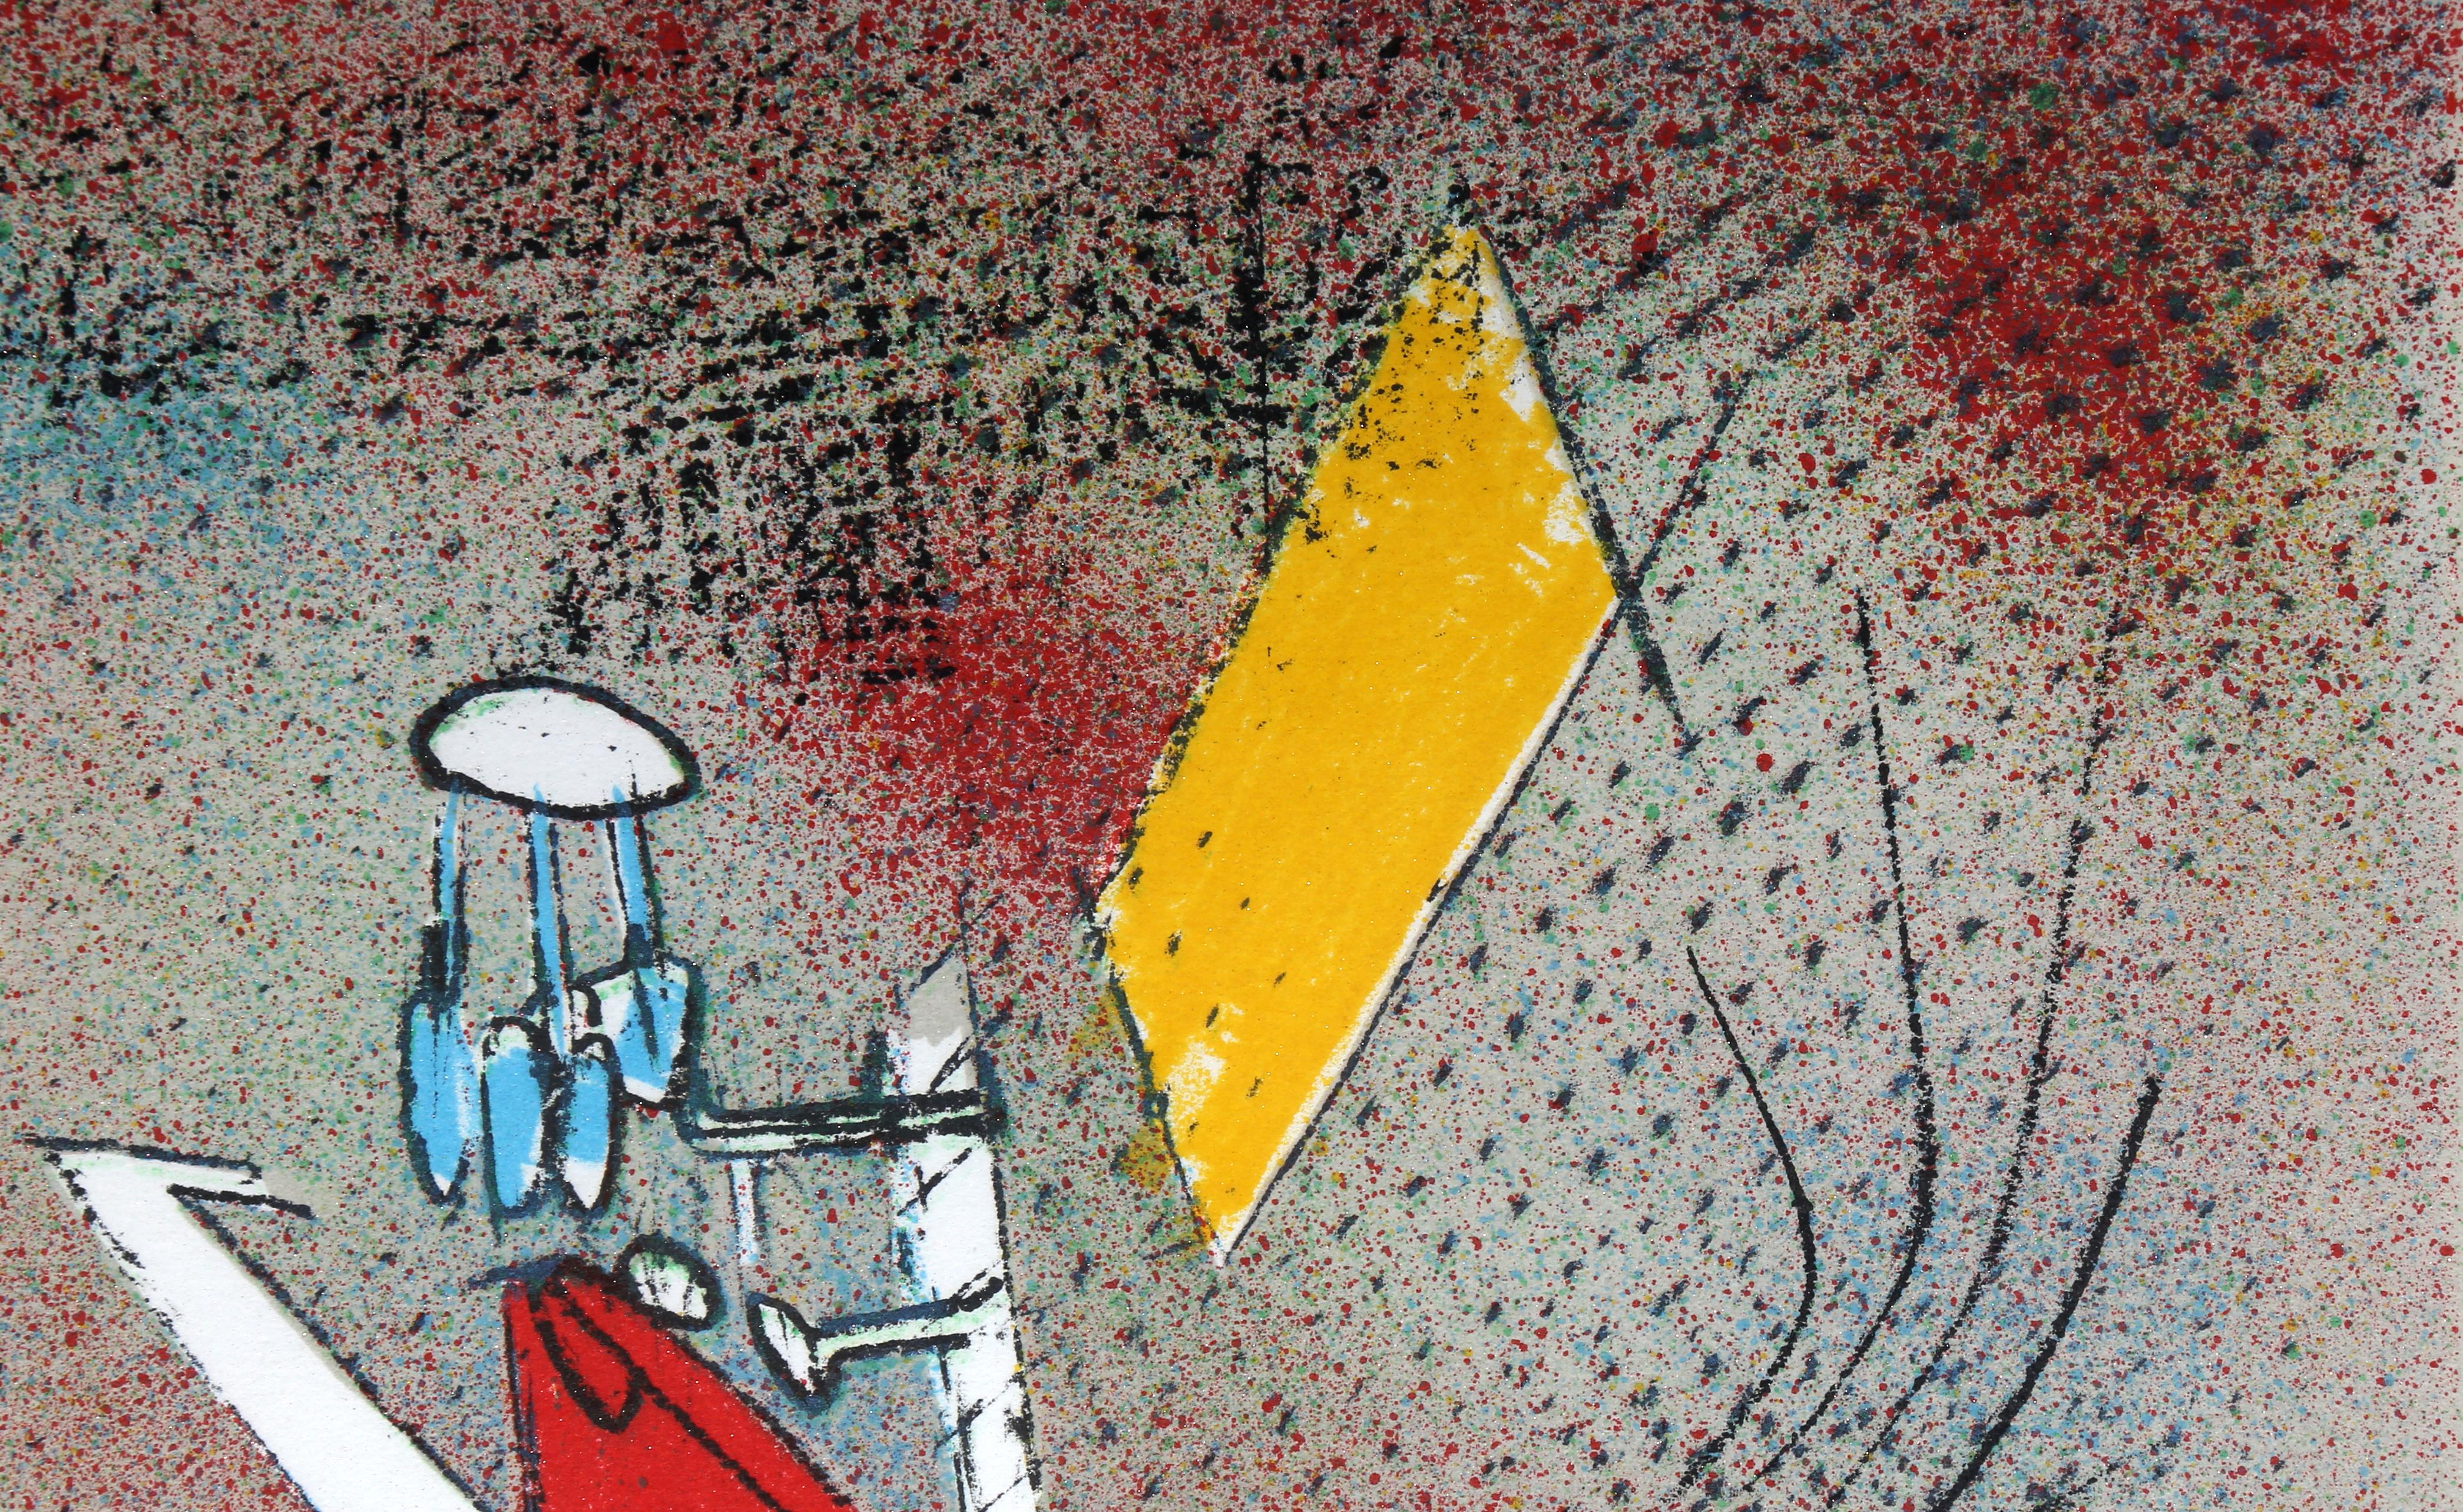 Comique Trippe VII by Roberto Matta, Chilean (1911–2002)
Date: 1974
Lithograph, signed and numbered in pencil
Edition of 56/60
Image Size: 12.25 x 17.25 inches
Size: 16.25 x 20.5 in. (41.28 x 52.07 cm)
Frame Size: 18 x 22.58 inches
Publisher: